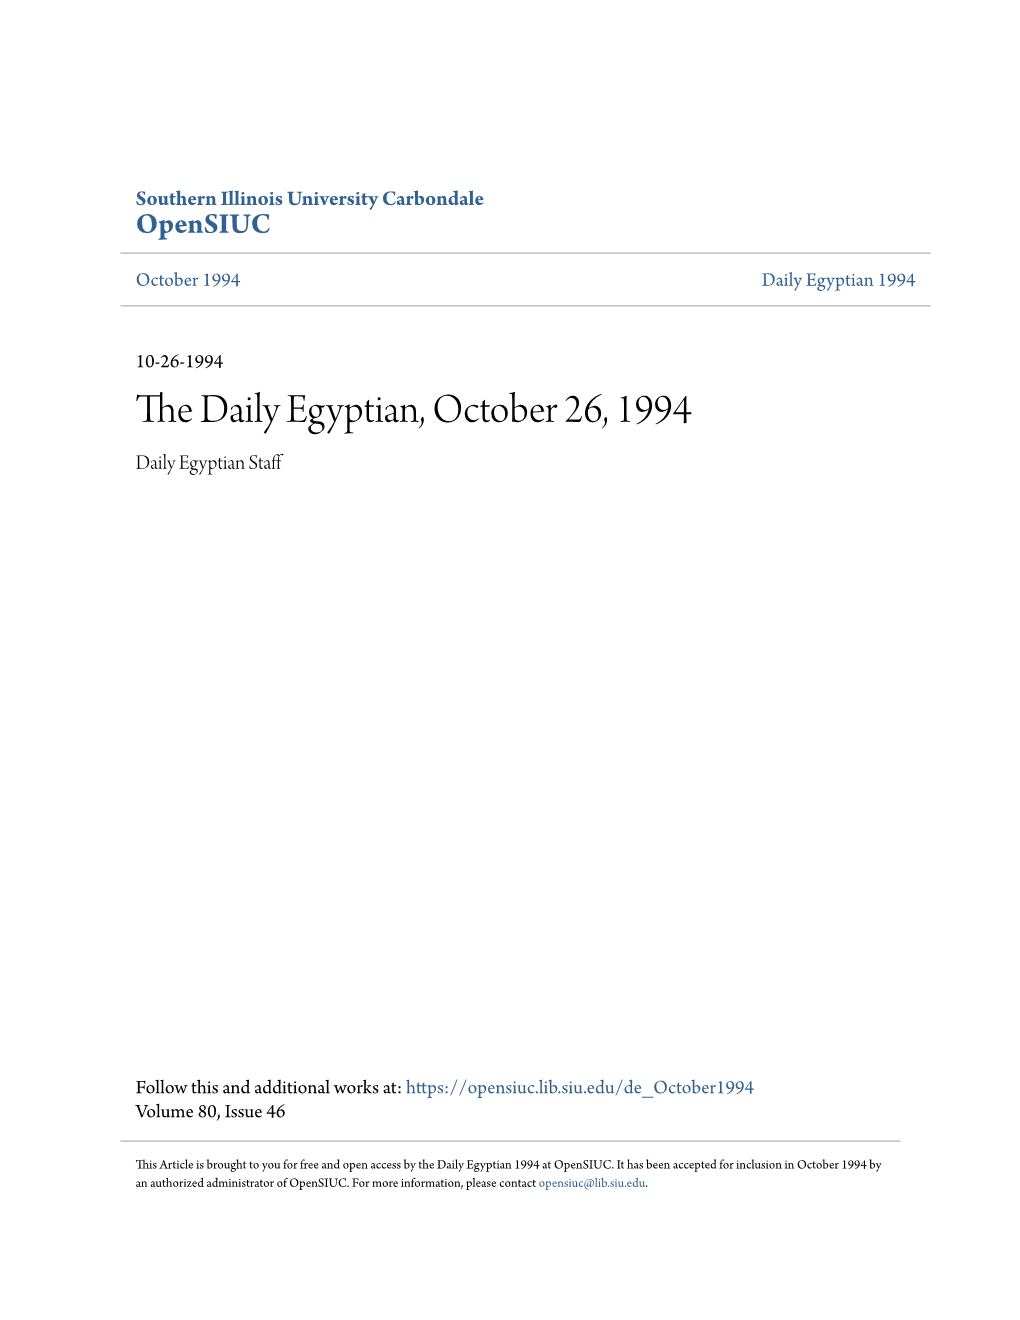 The Daily Egyptian, October 26, 1994